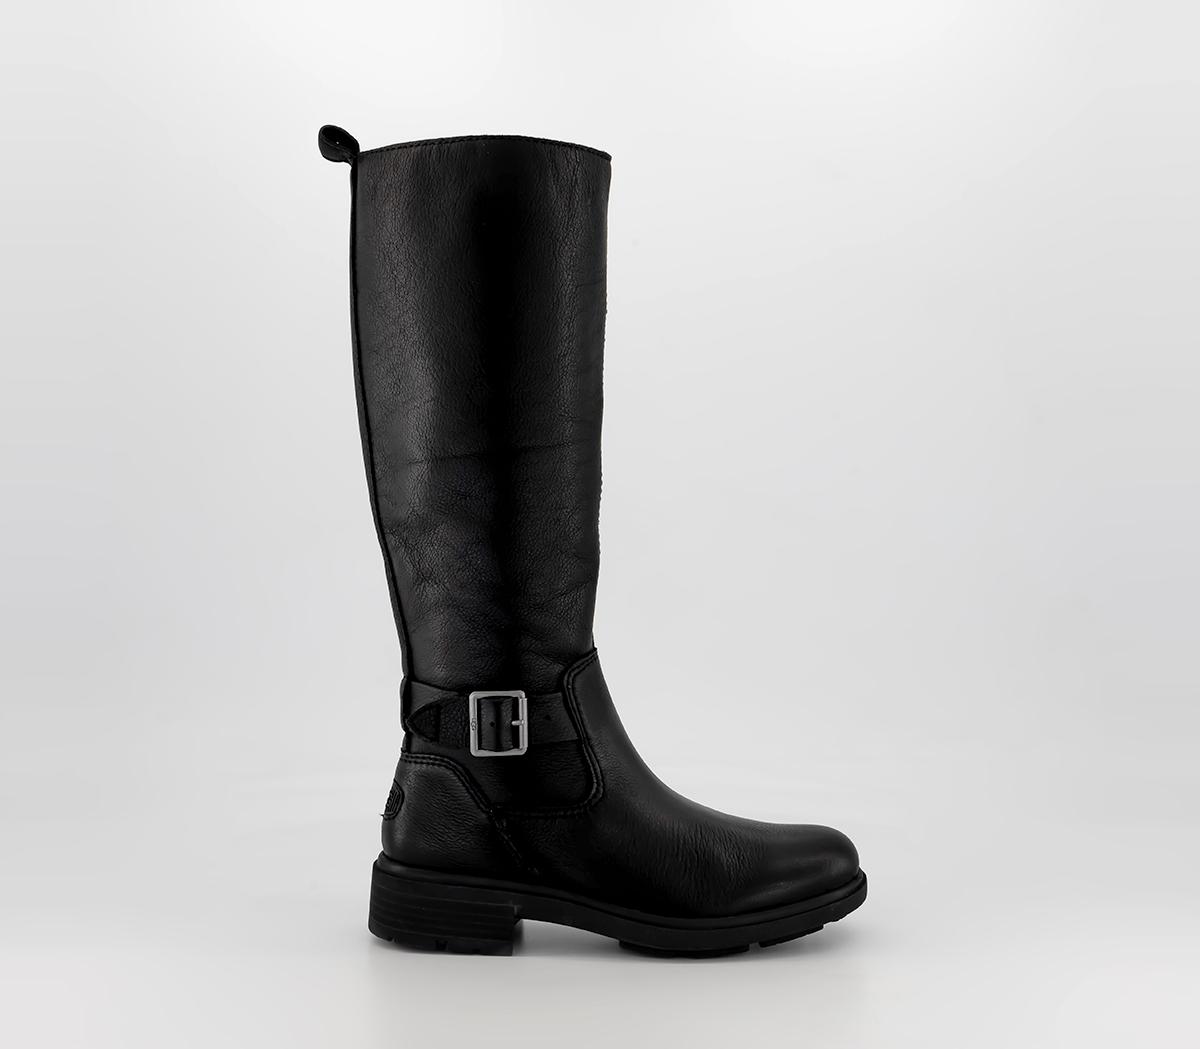 UGG Harrison Tall Boots Black - Women’s Sustainable Materials